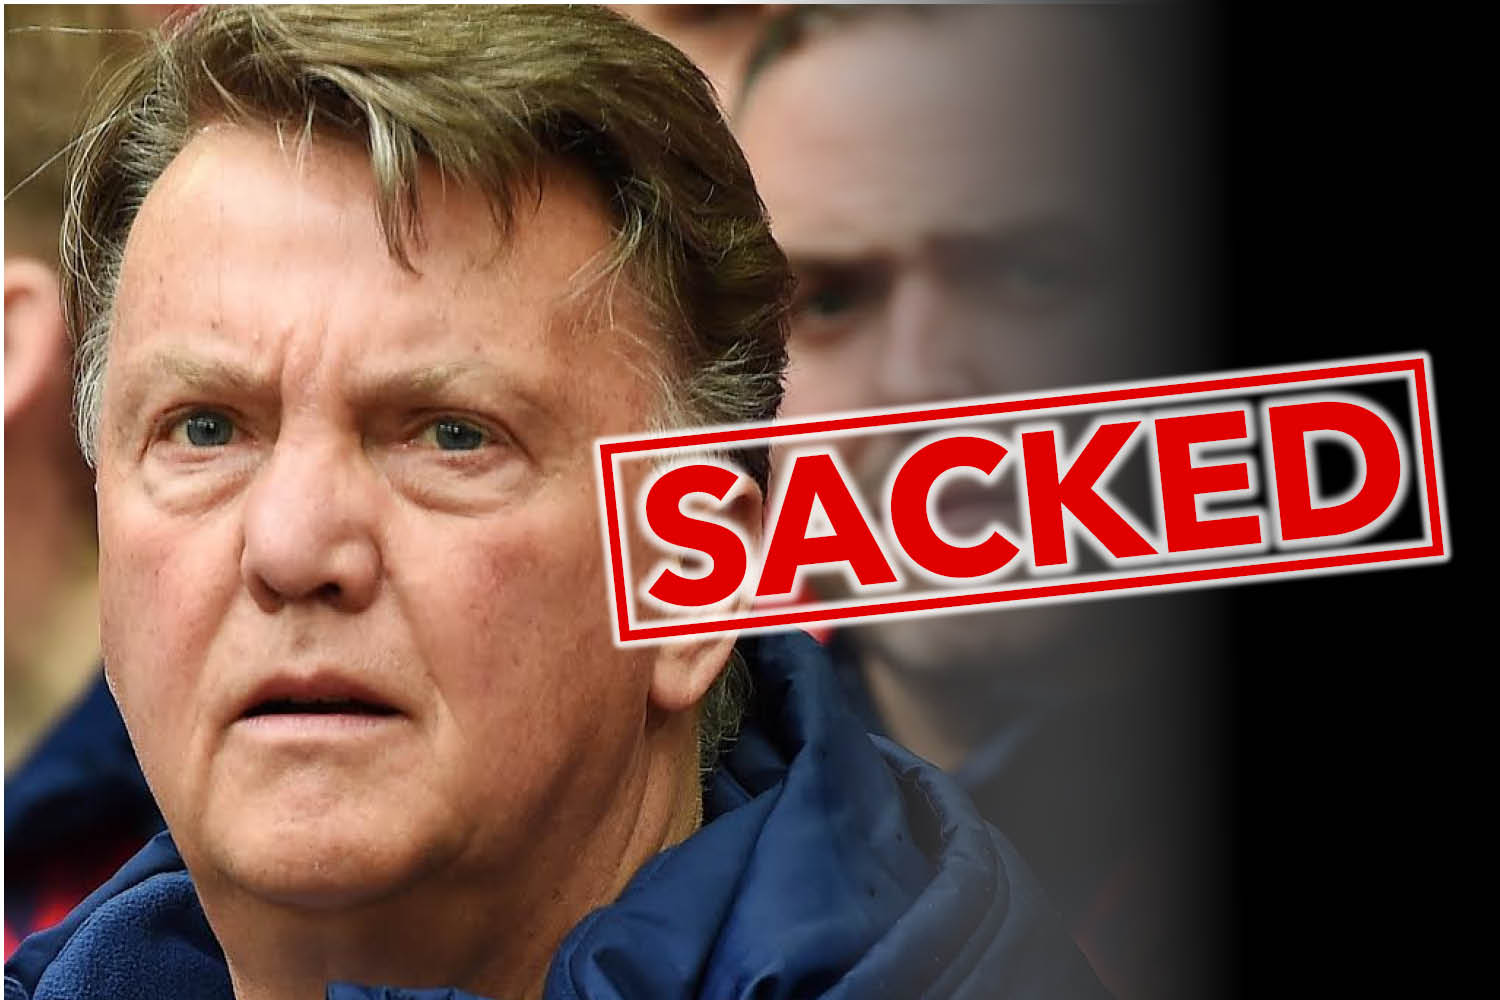 Louis van Gaal and his staff sacked by Manchester United ...